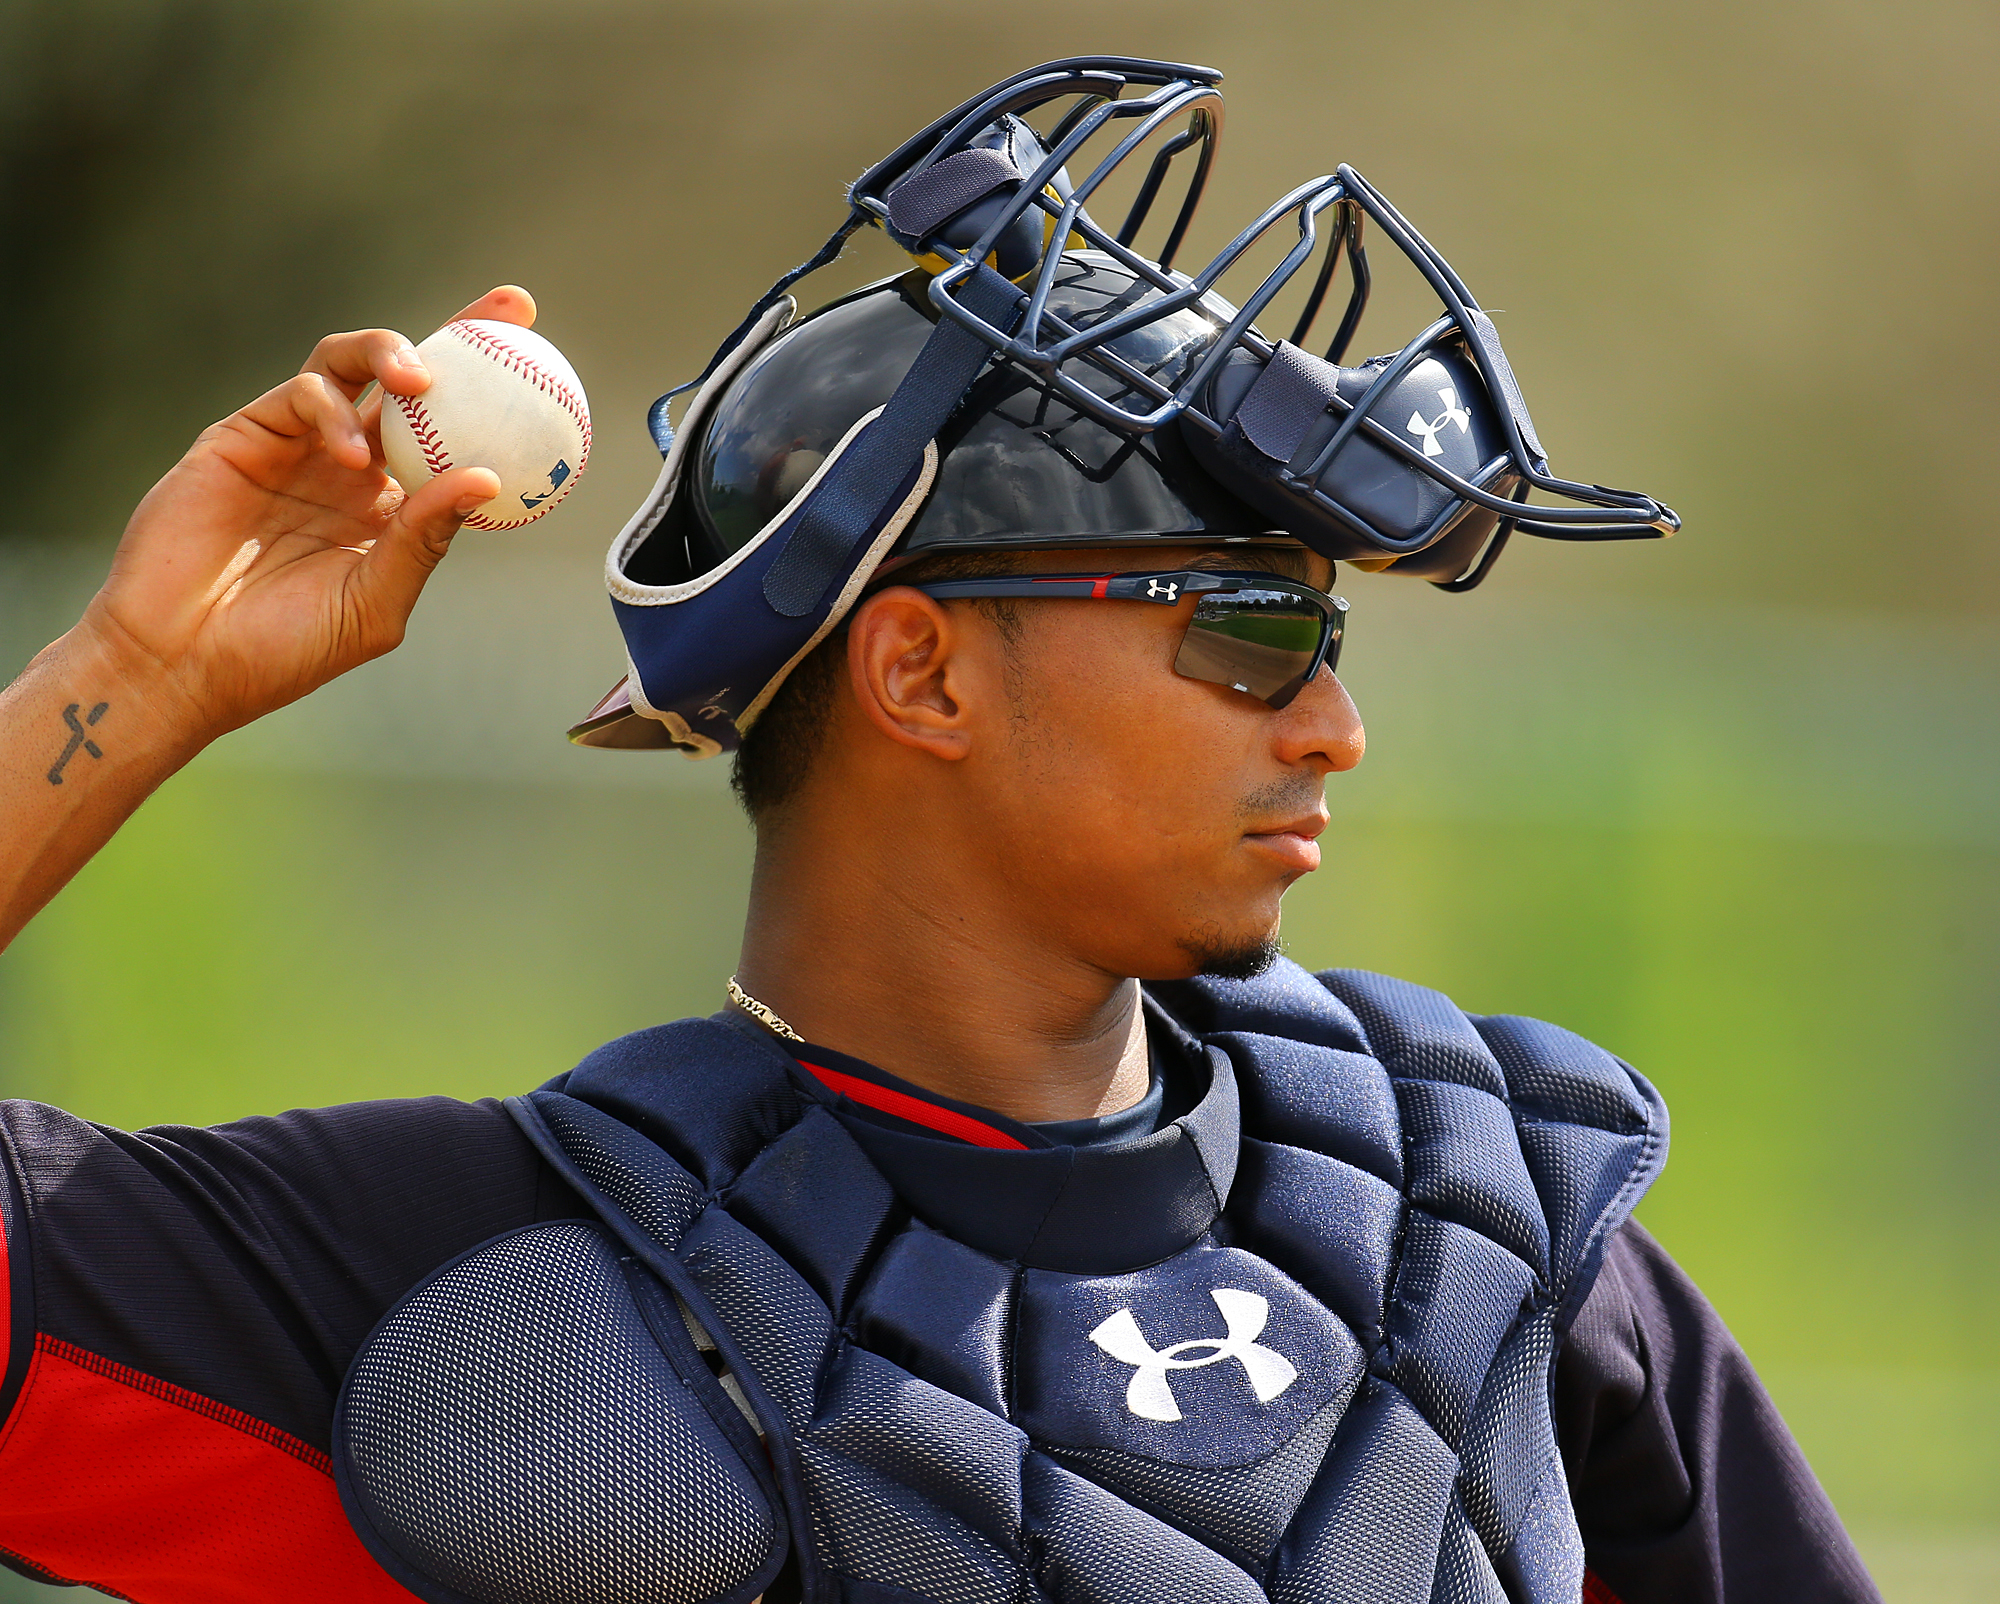 Catcher Christian Bethancourt makes the Padres roster as a pitcher